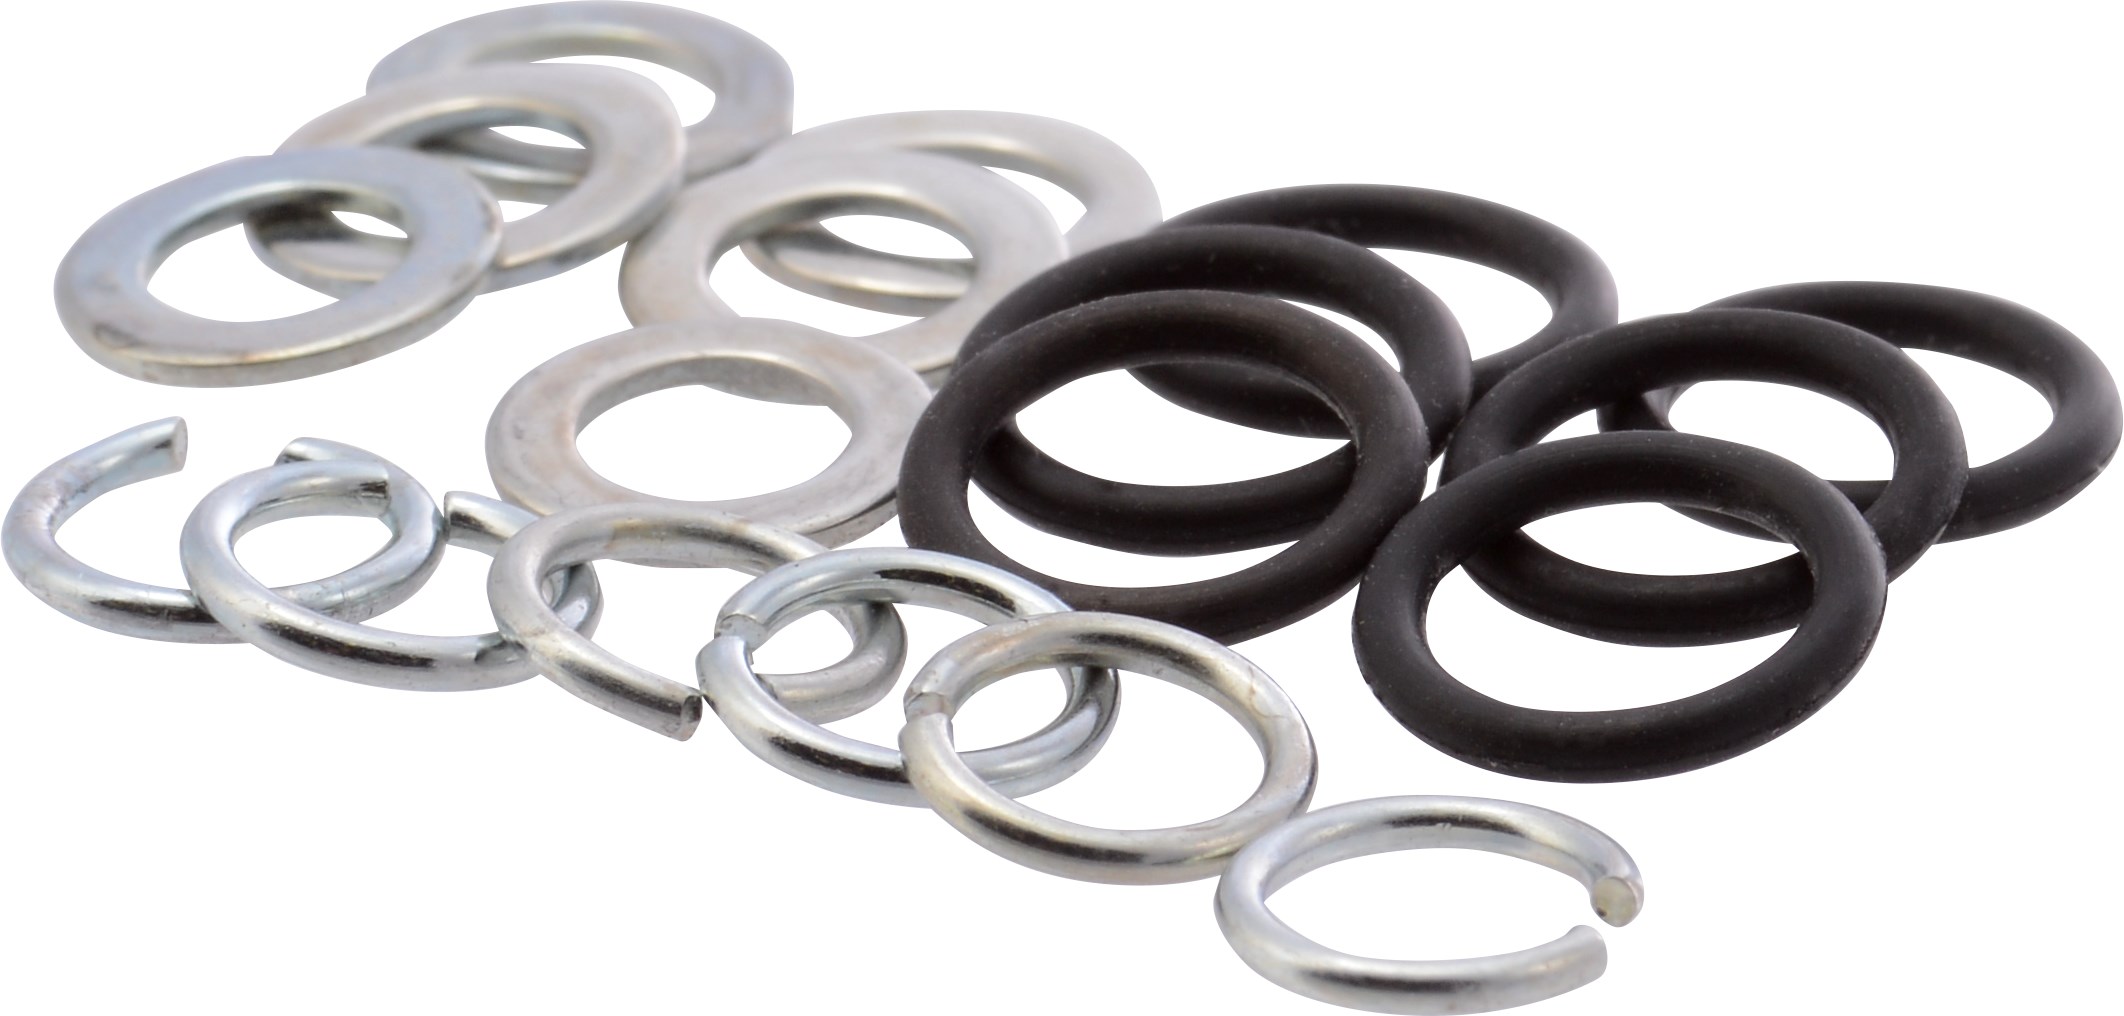 Jak-Hammer 75 O Rings/Retainers/Washers